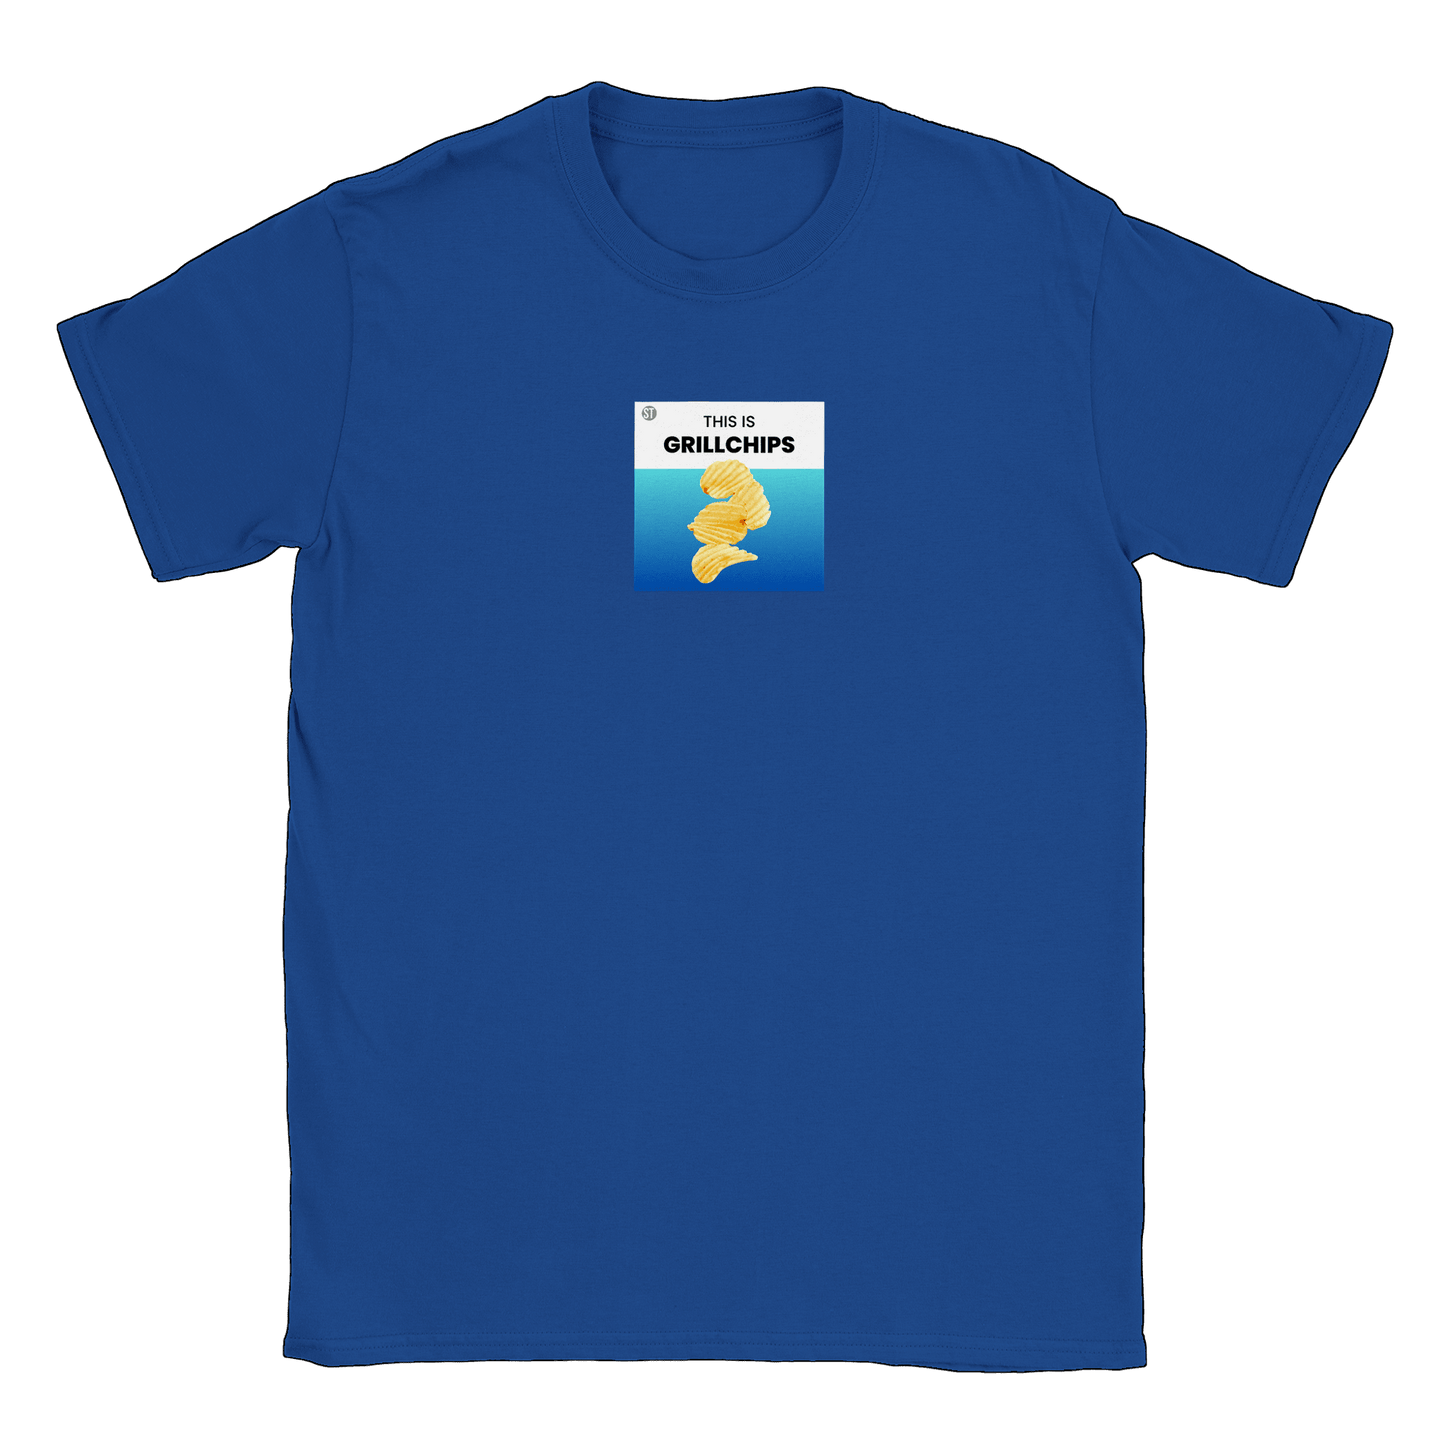 This is Grillchips - T-shirt Royal